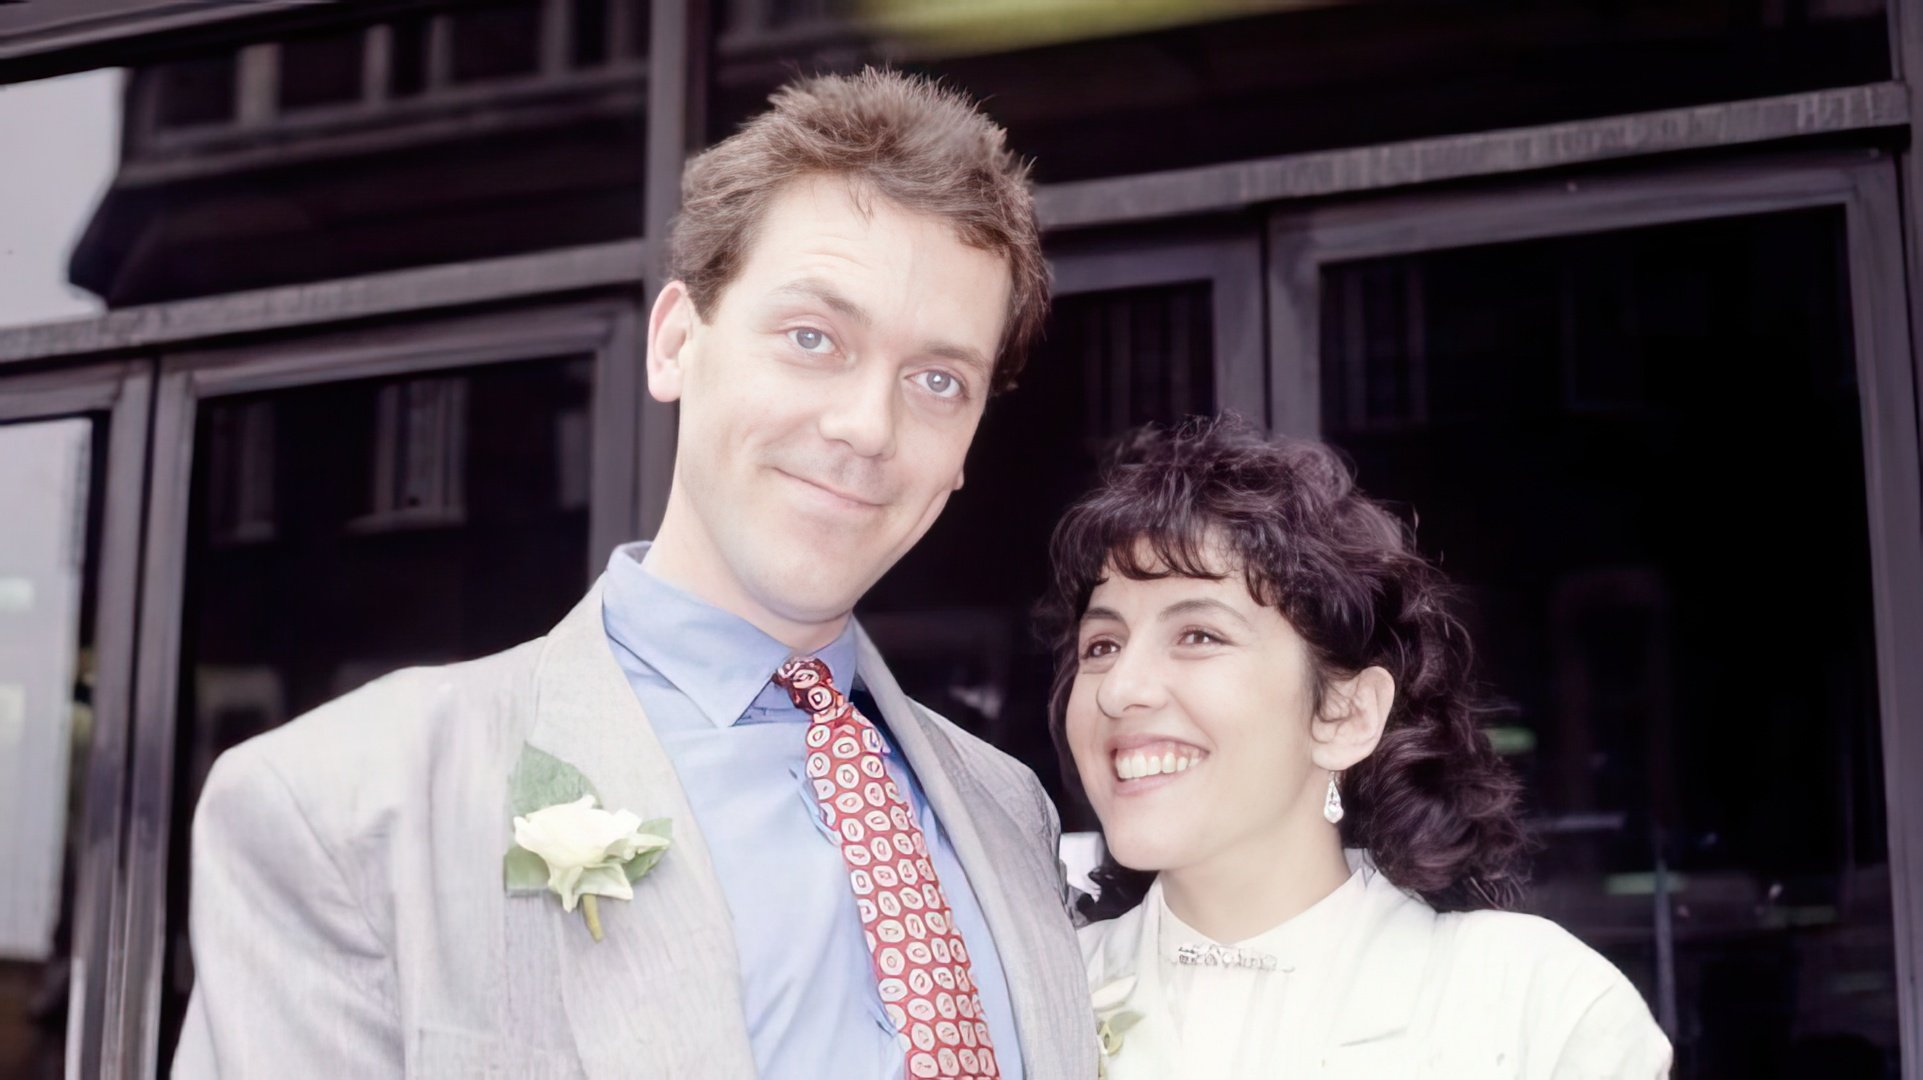 The wedding of Hugh Laurie and Jo Green